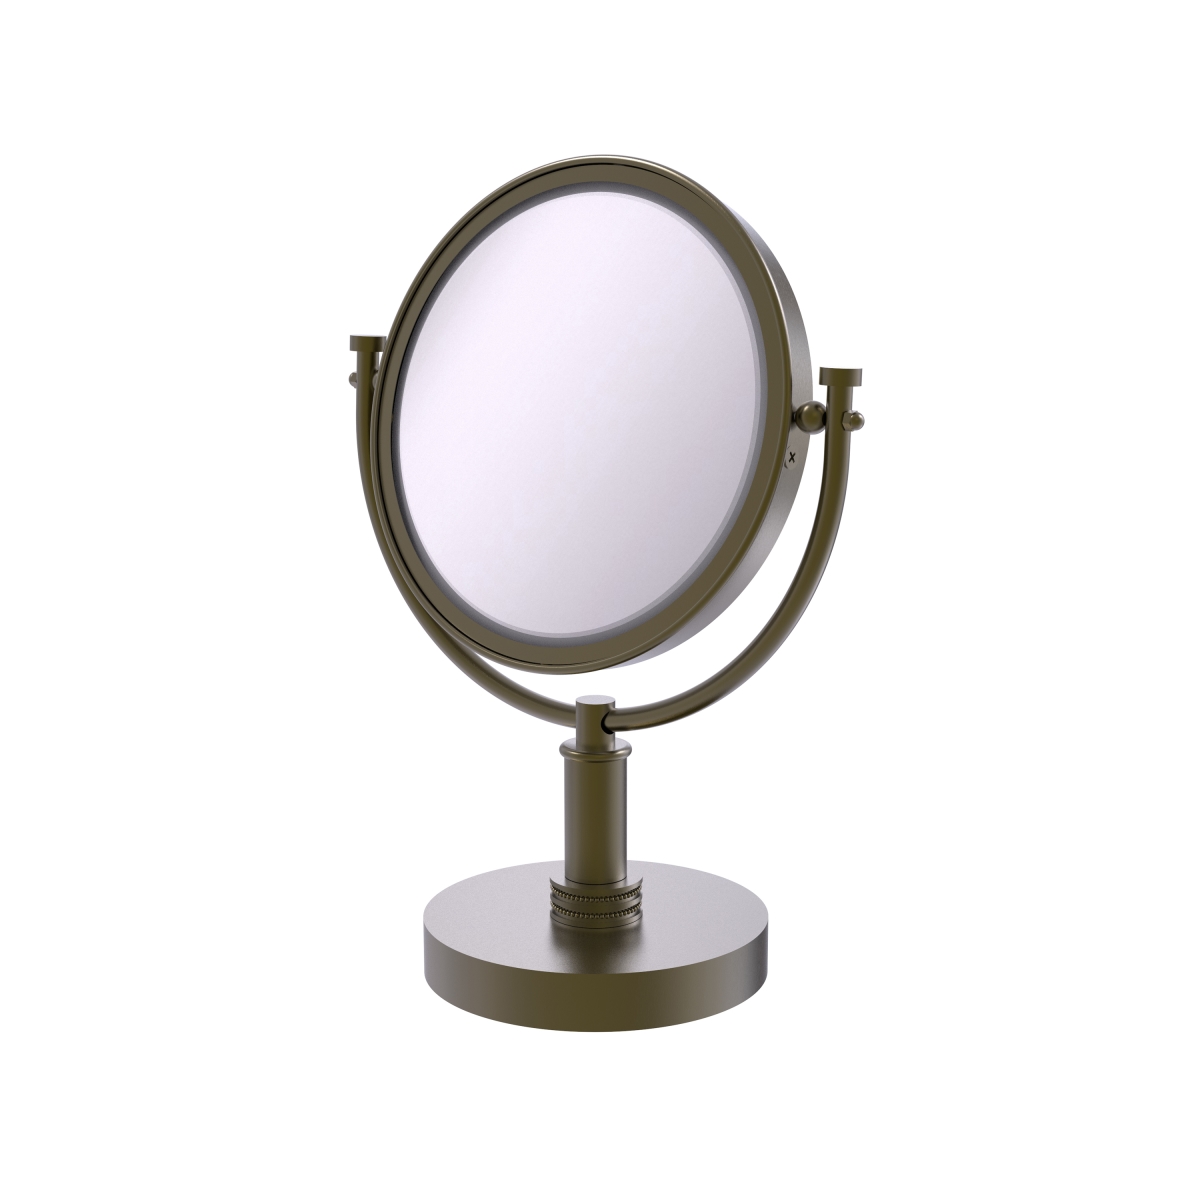 Picture of Allied Brass DM-4D-4X-ABR 8 in. Vanity Top Make-Up Mirror 4X Magnification, Antique Brass - 15 x 8 x 8 in.